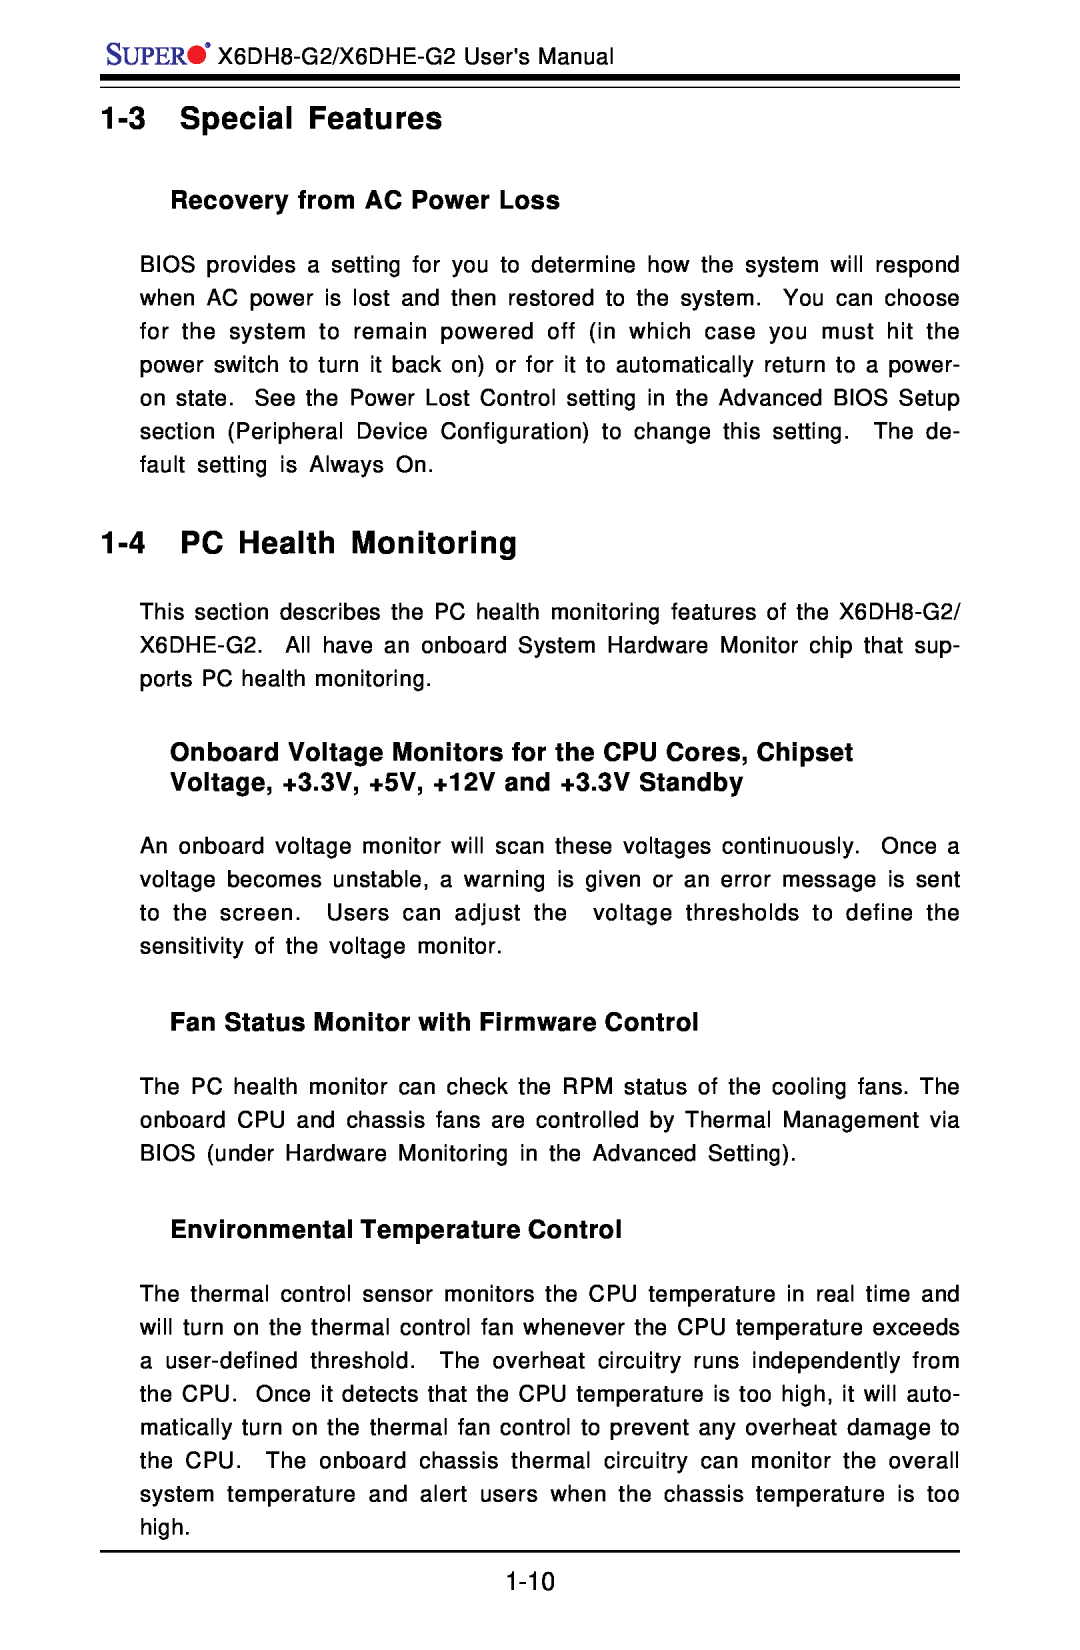 SUPER MICRO Computer X6DH8-G2, X6DHE-G2 manual Special Features, PC Health Monitoring, Recovery from AC Power Loss 